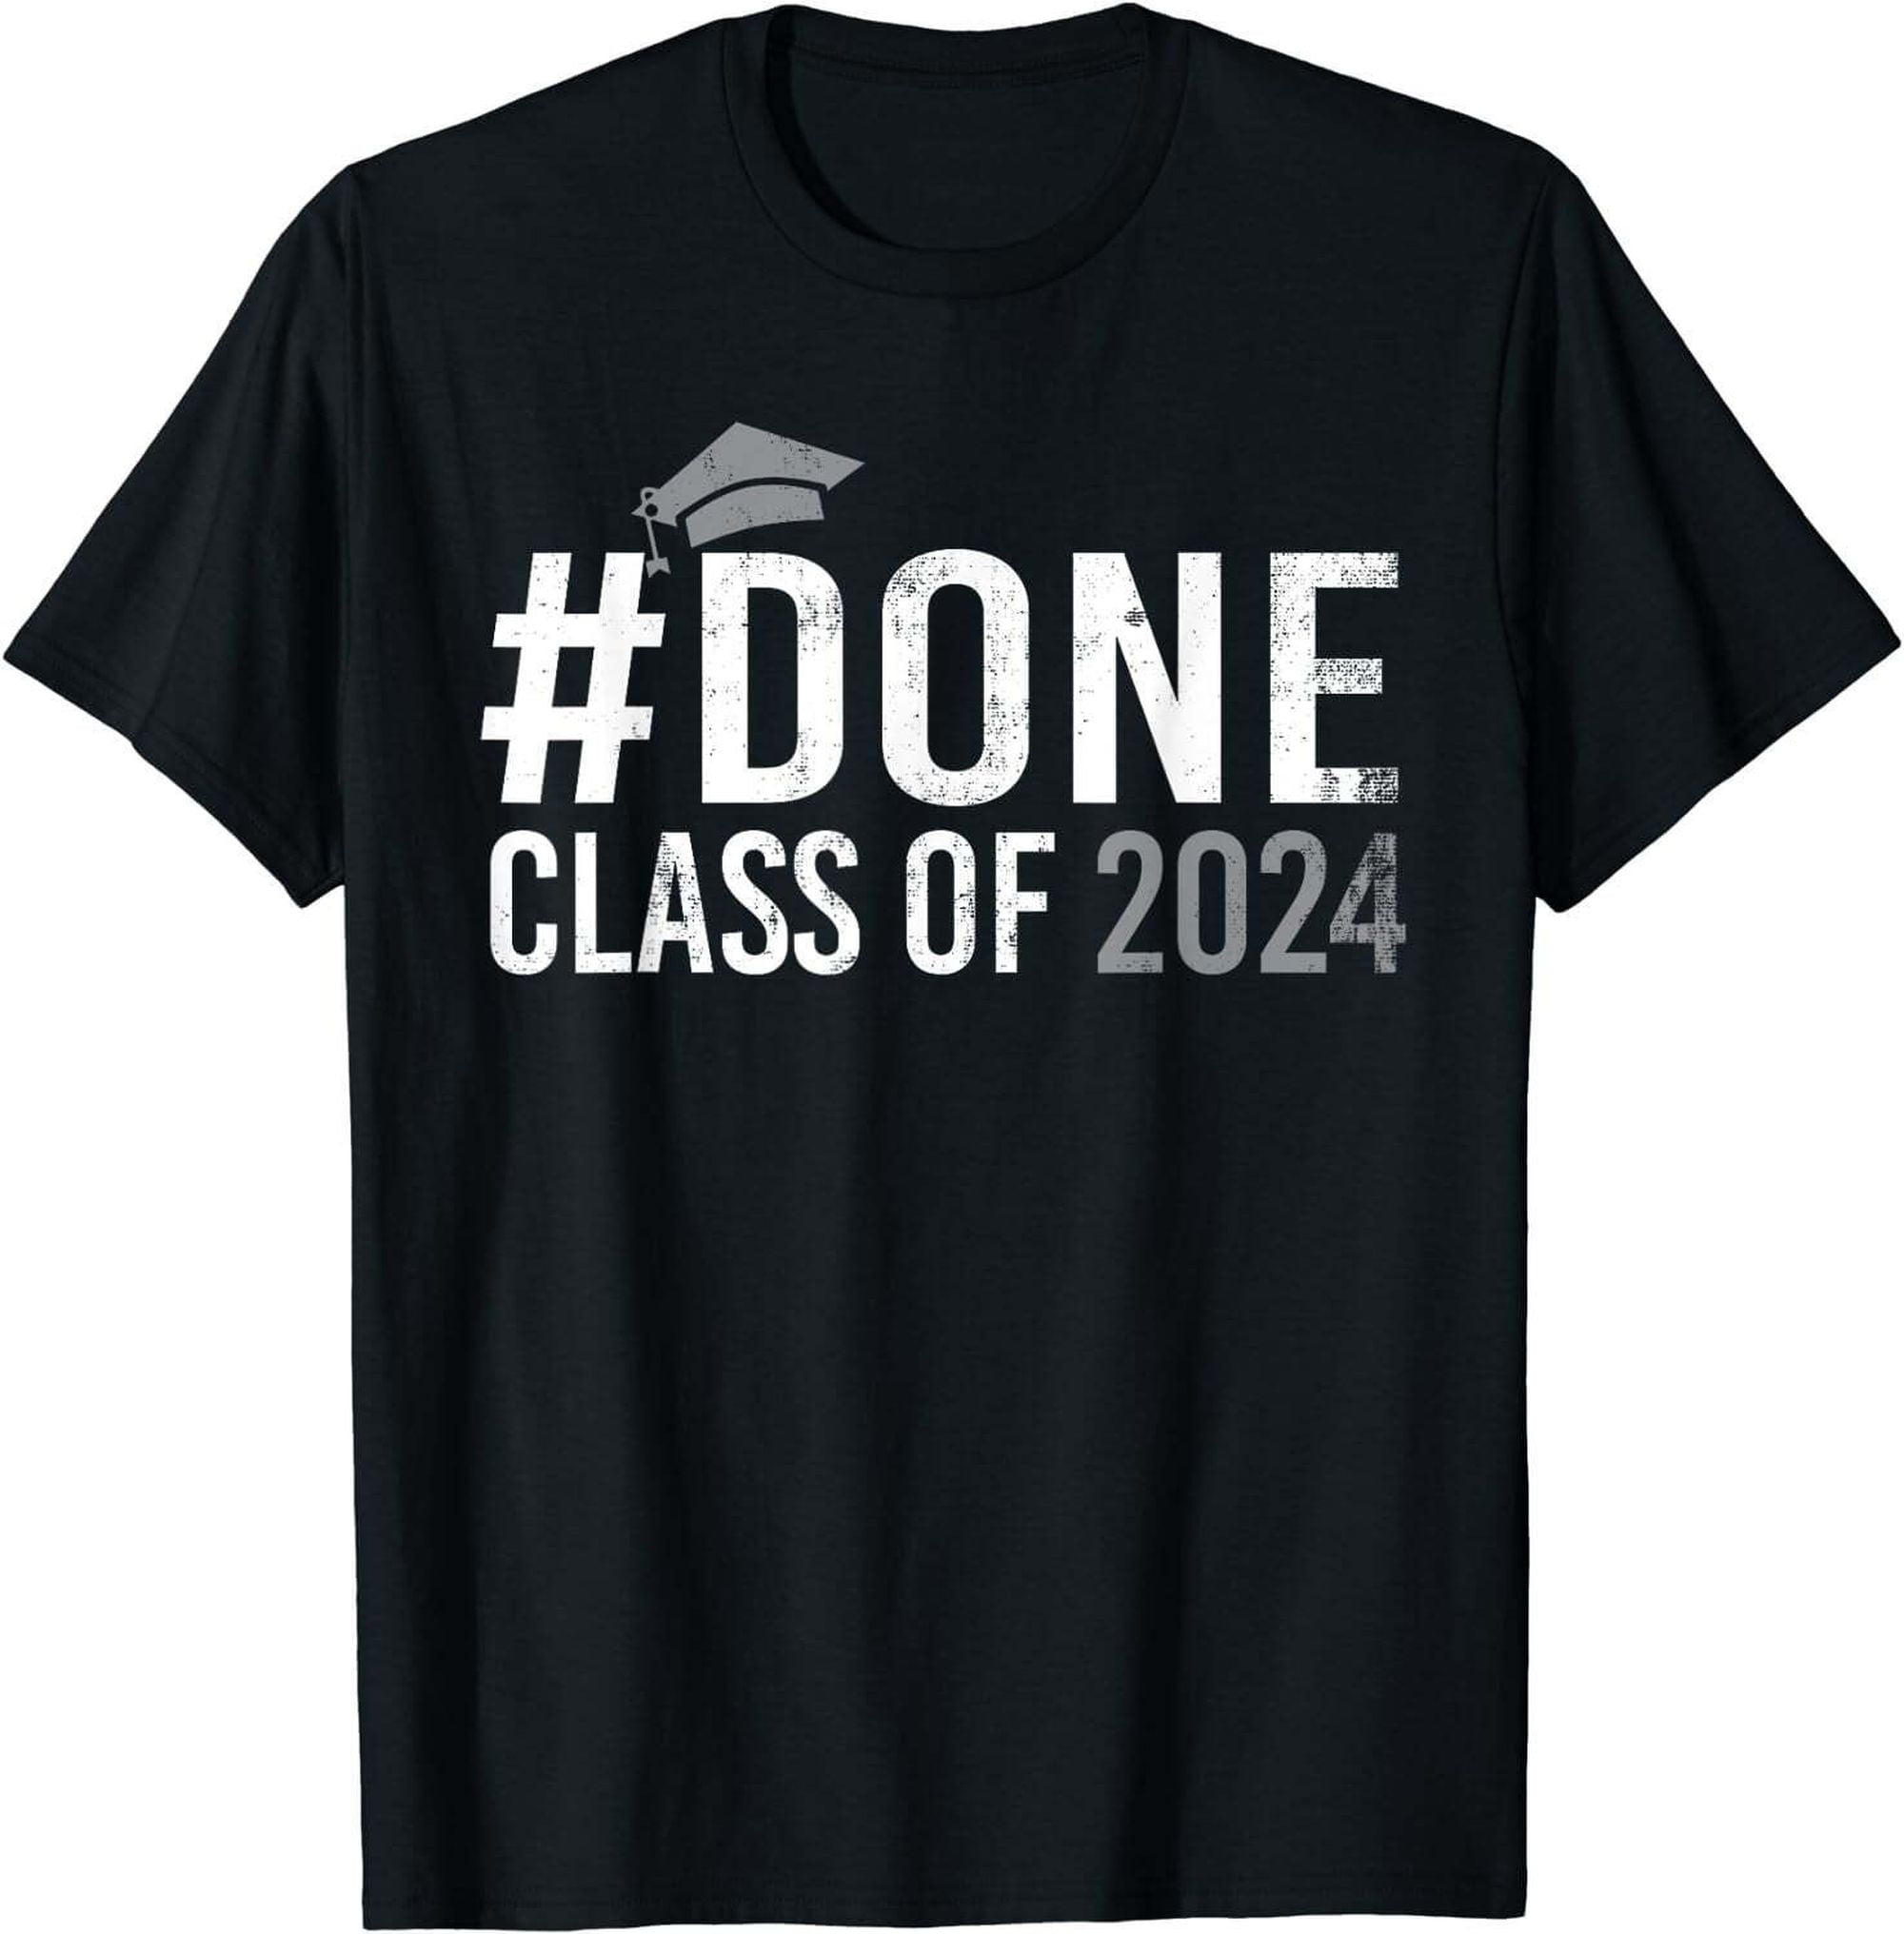 Class of 2024: Rising Seniors Ready to Graduate in '24 - Celebrate with ...